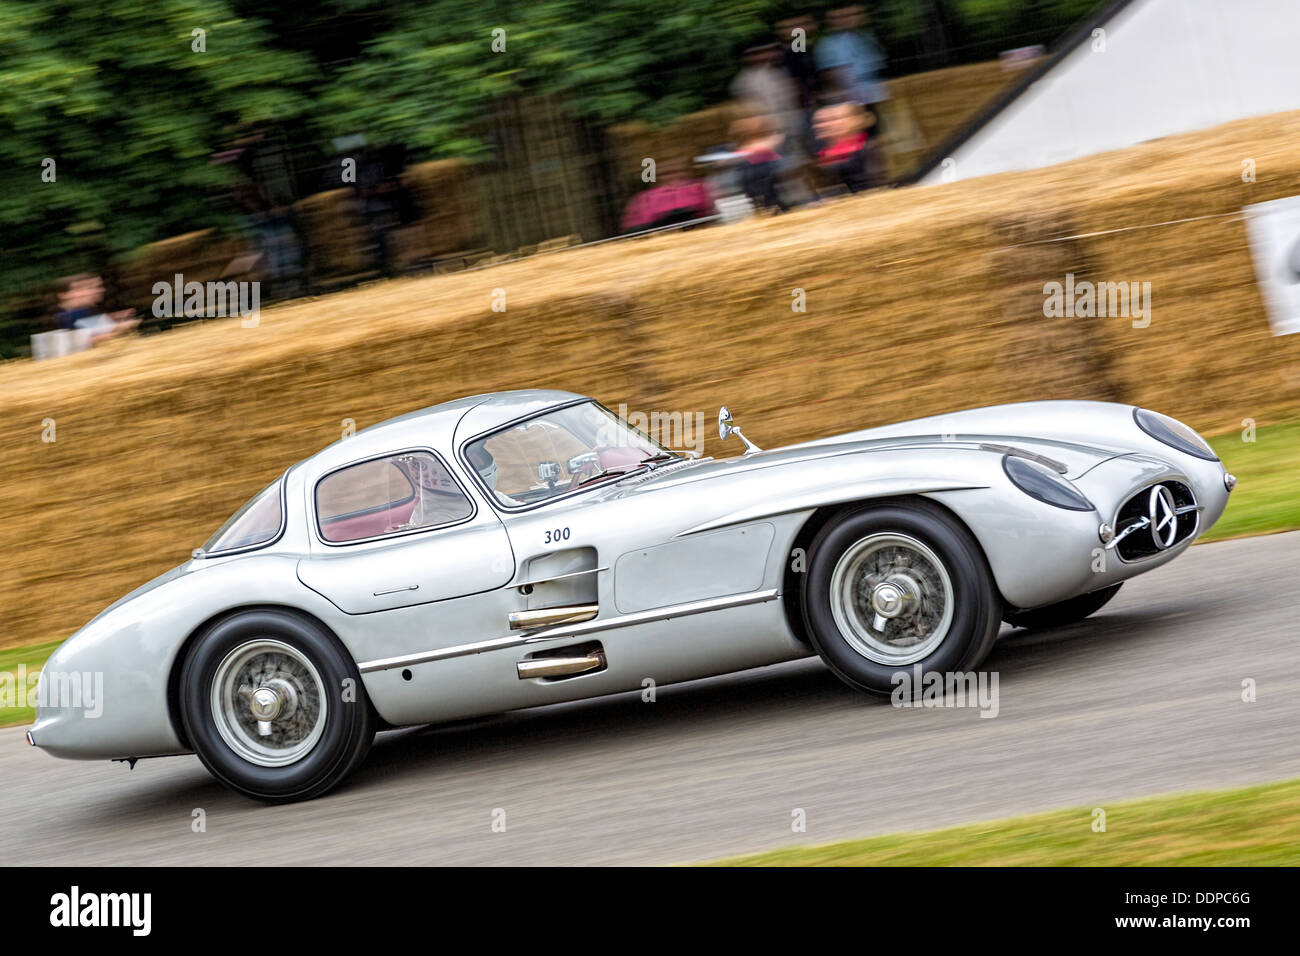 1955 Mercedes-Benz 300SLR Uhlenhaut Coupe at the 2013 Goodwood Festival of Speed, Sussex, UK. Driver - Hans Hermann. Stock Photo